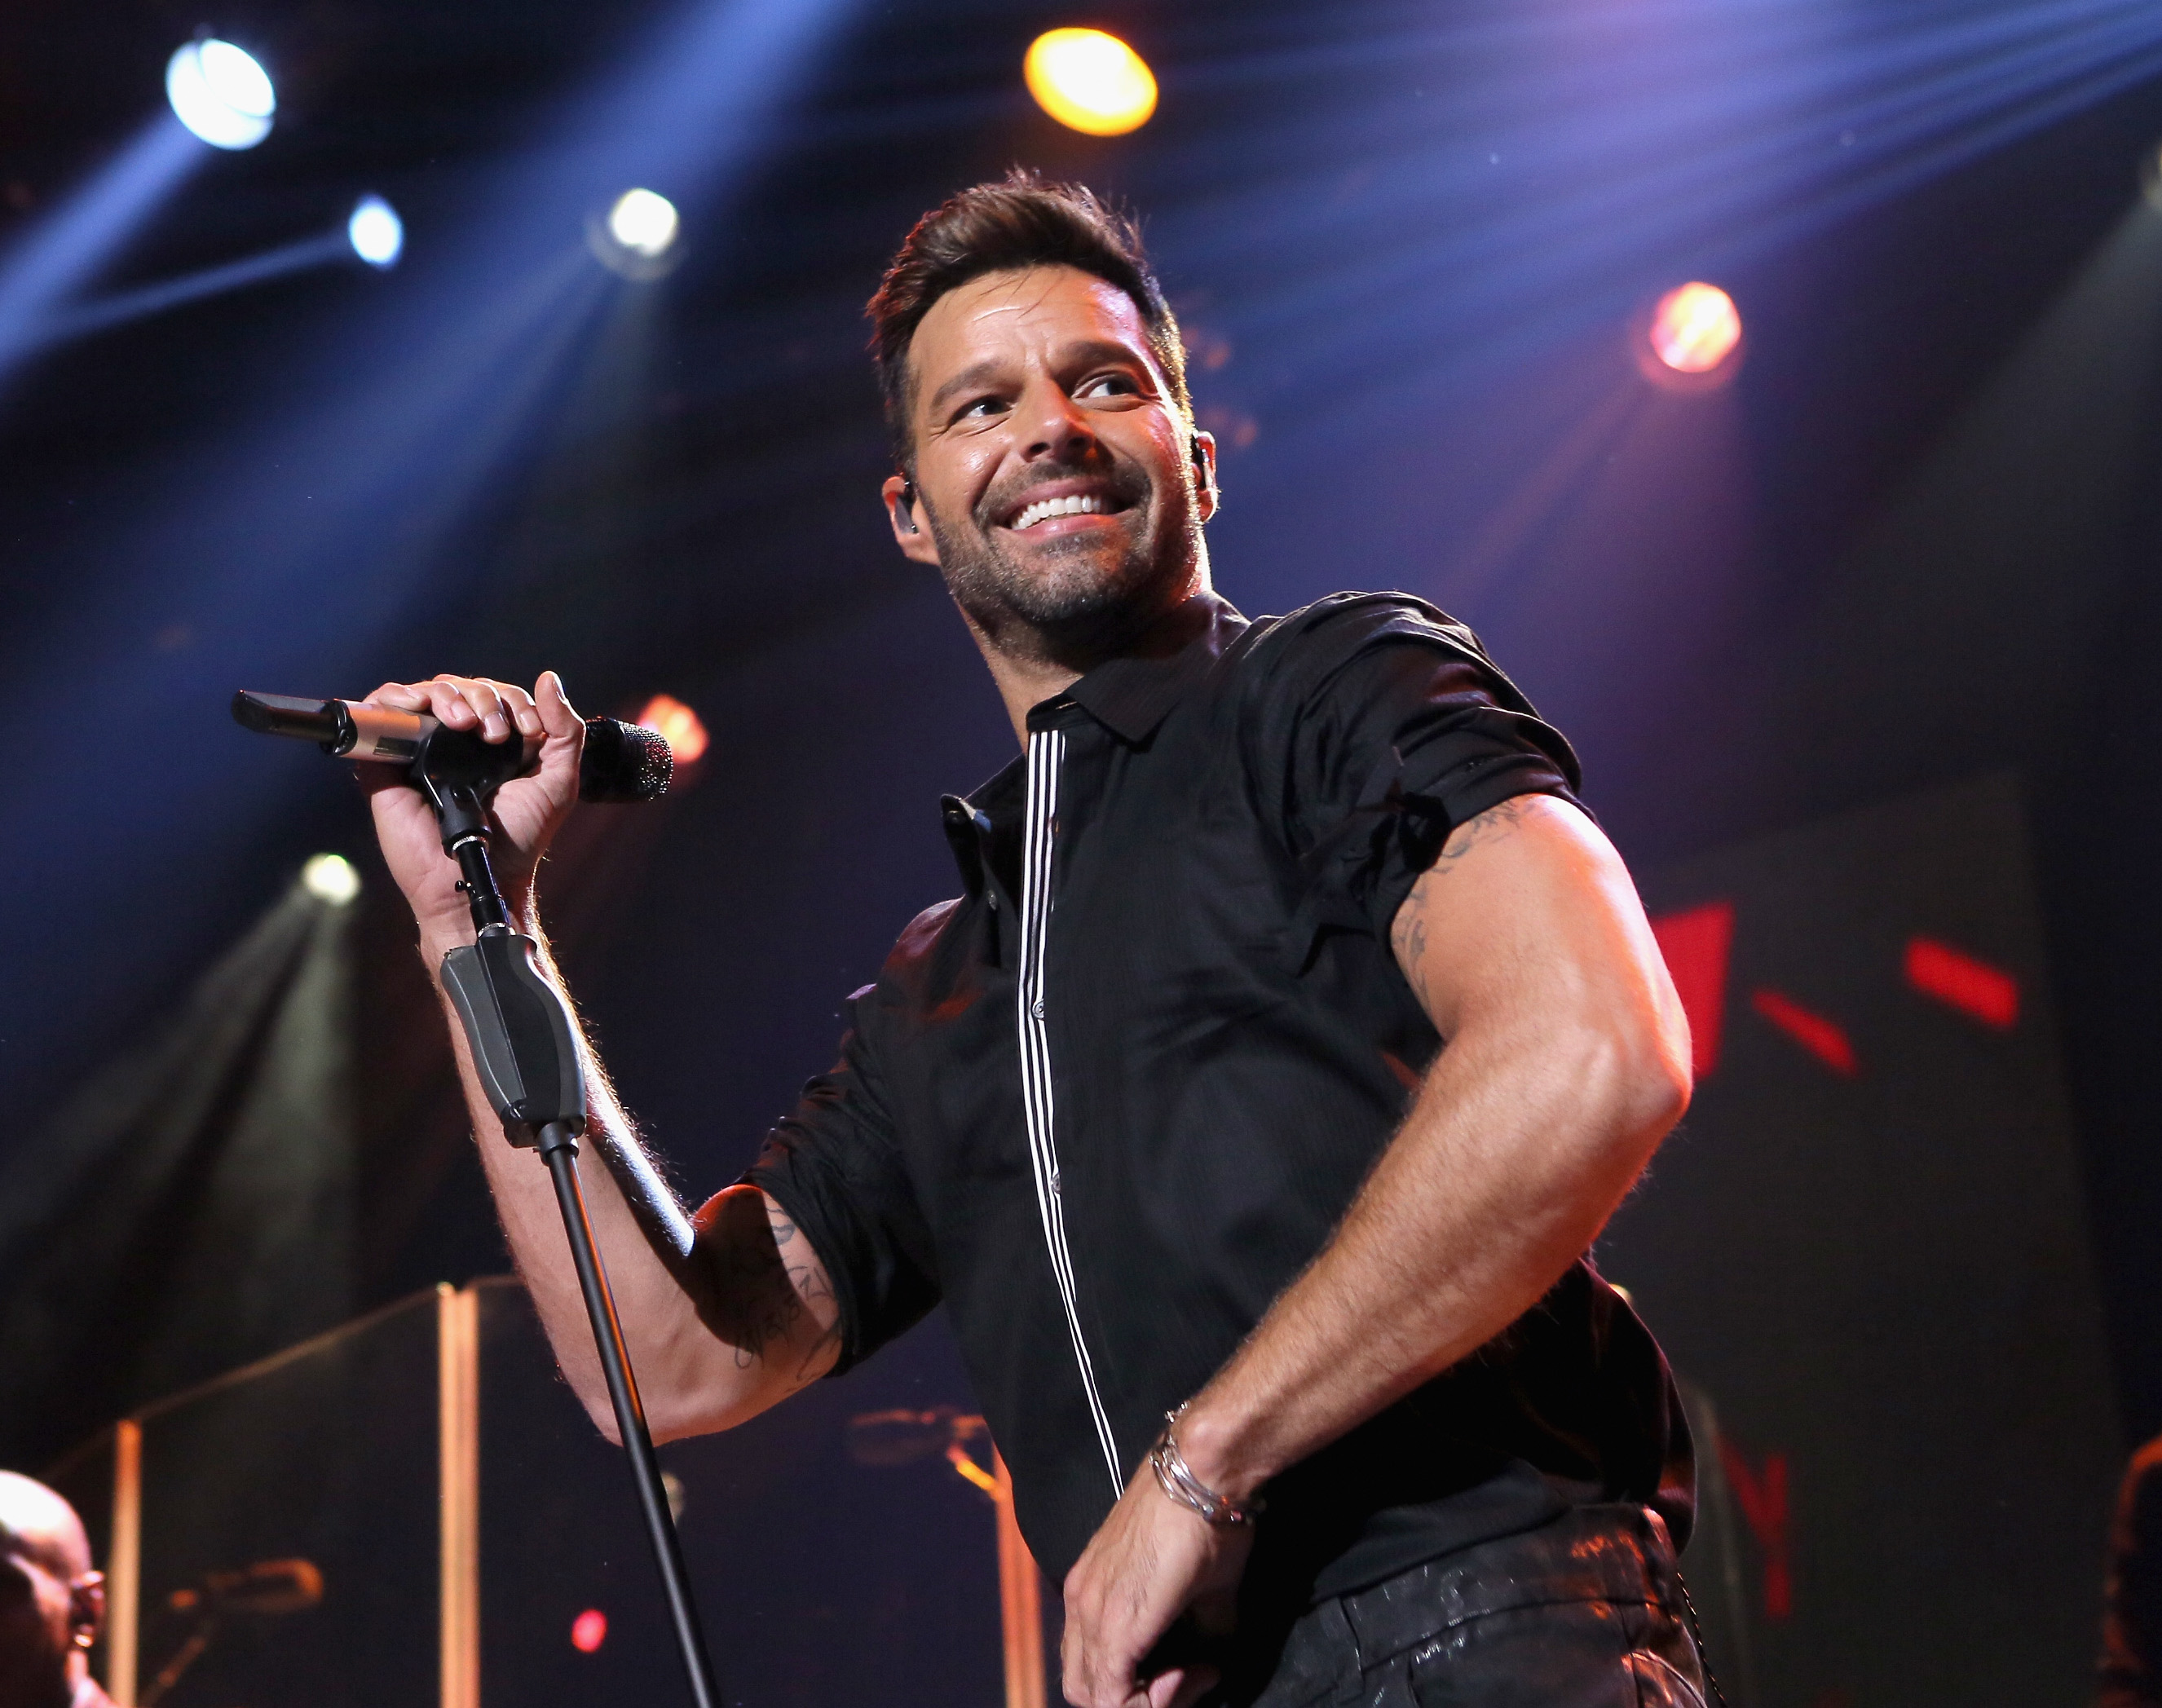 Ricky Martin holding a microphone